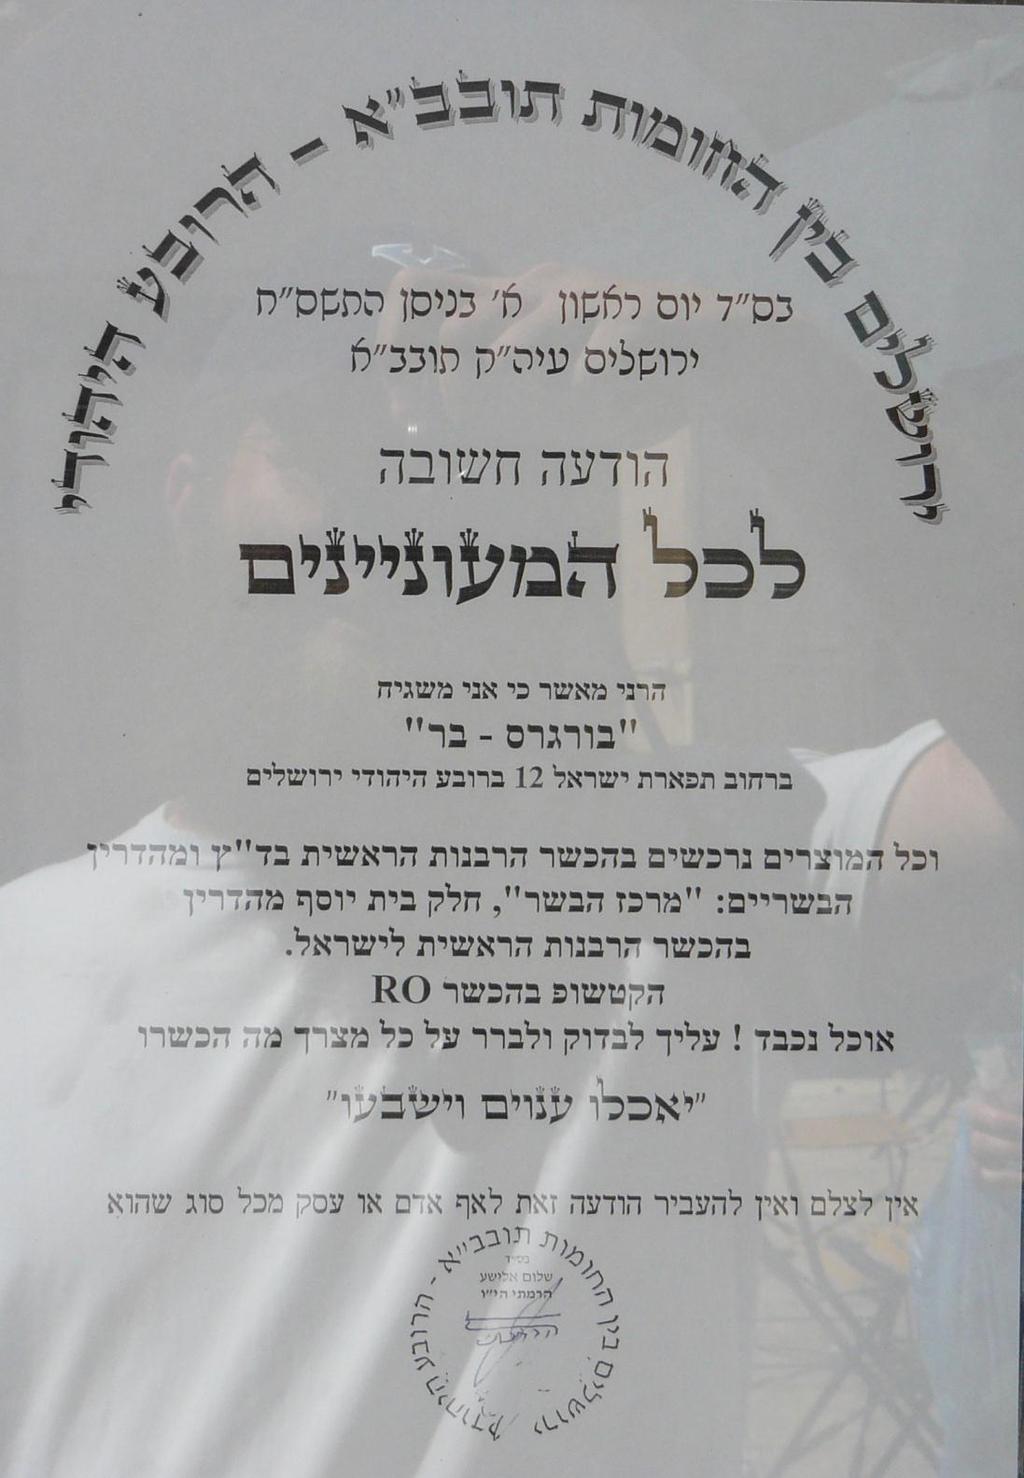 Nice font, right? Looks just like the script in a Sefer Torah! All the right words what could be wrong with this?